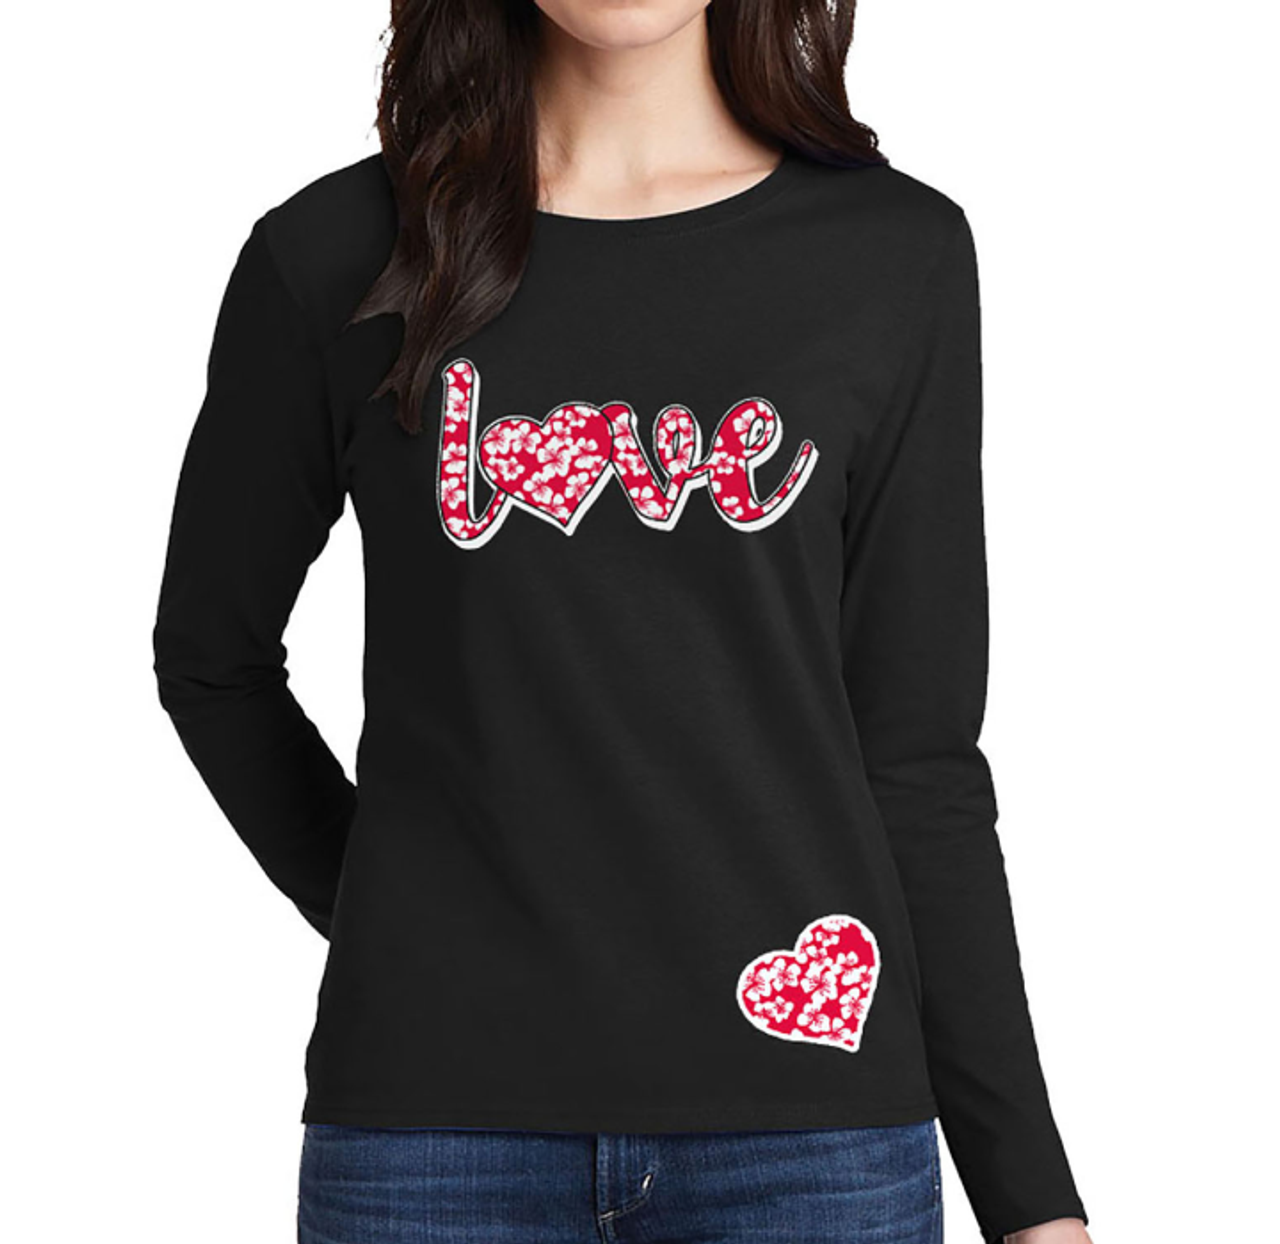 Women's Valentine's Day Shirts product image